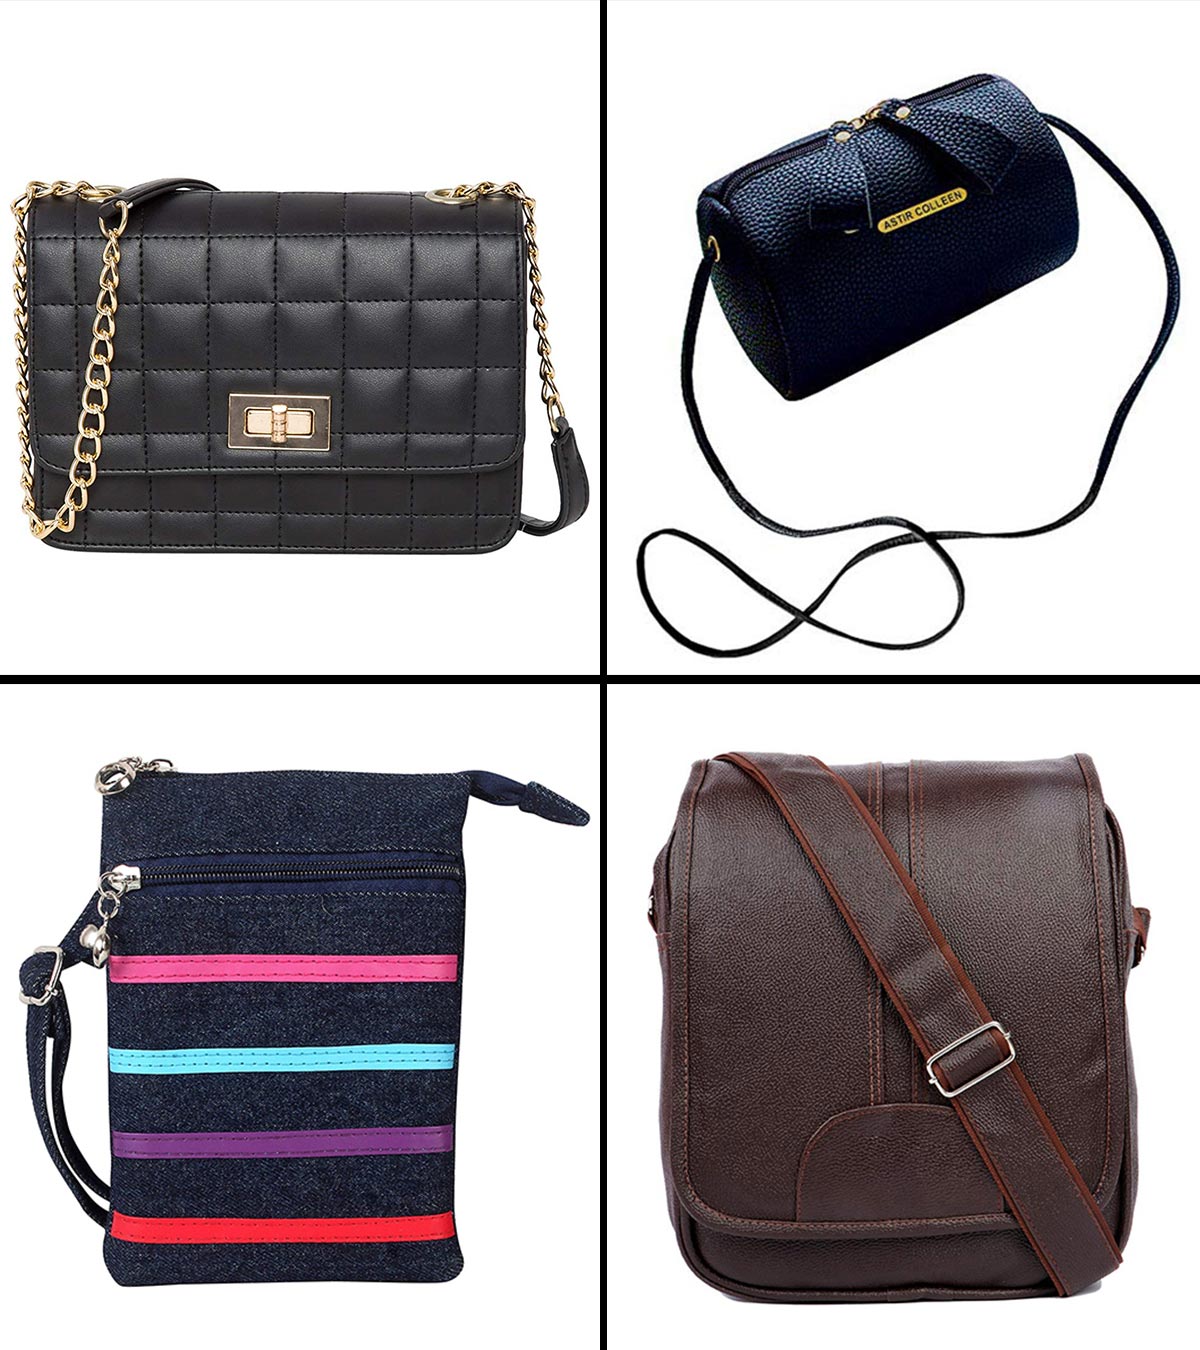 Buy Sling Bags from top Brands at Best Prices Online in India